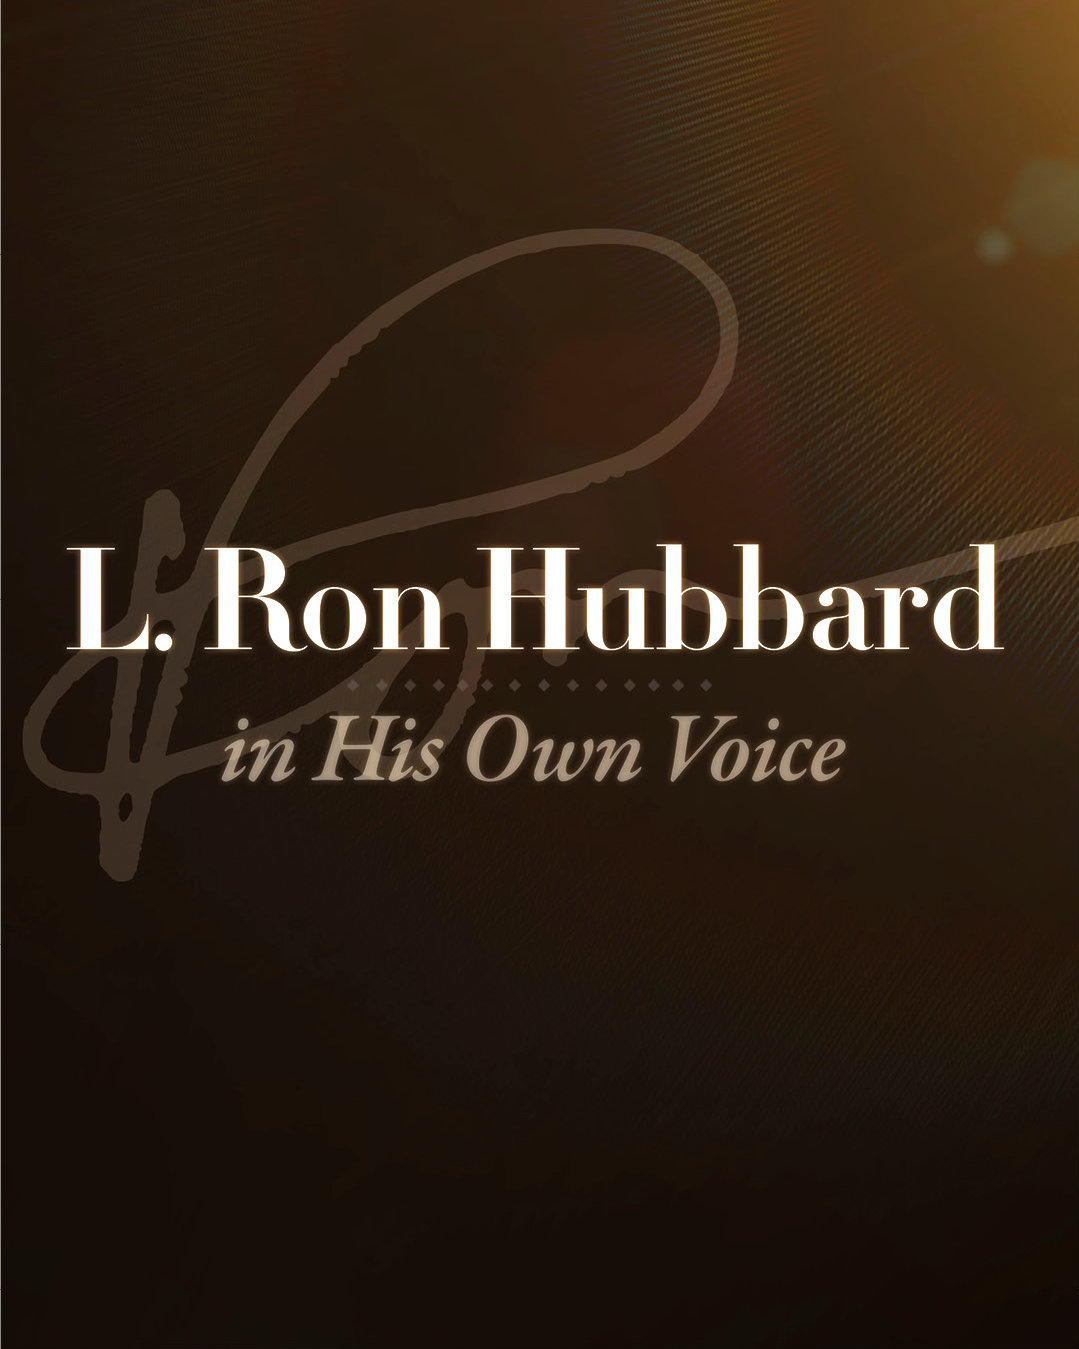 L. Ron Hubbard in His Own Voice (自らの声で語る)